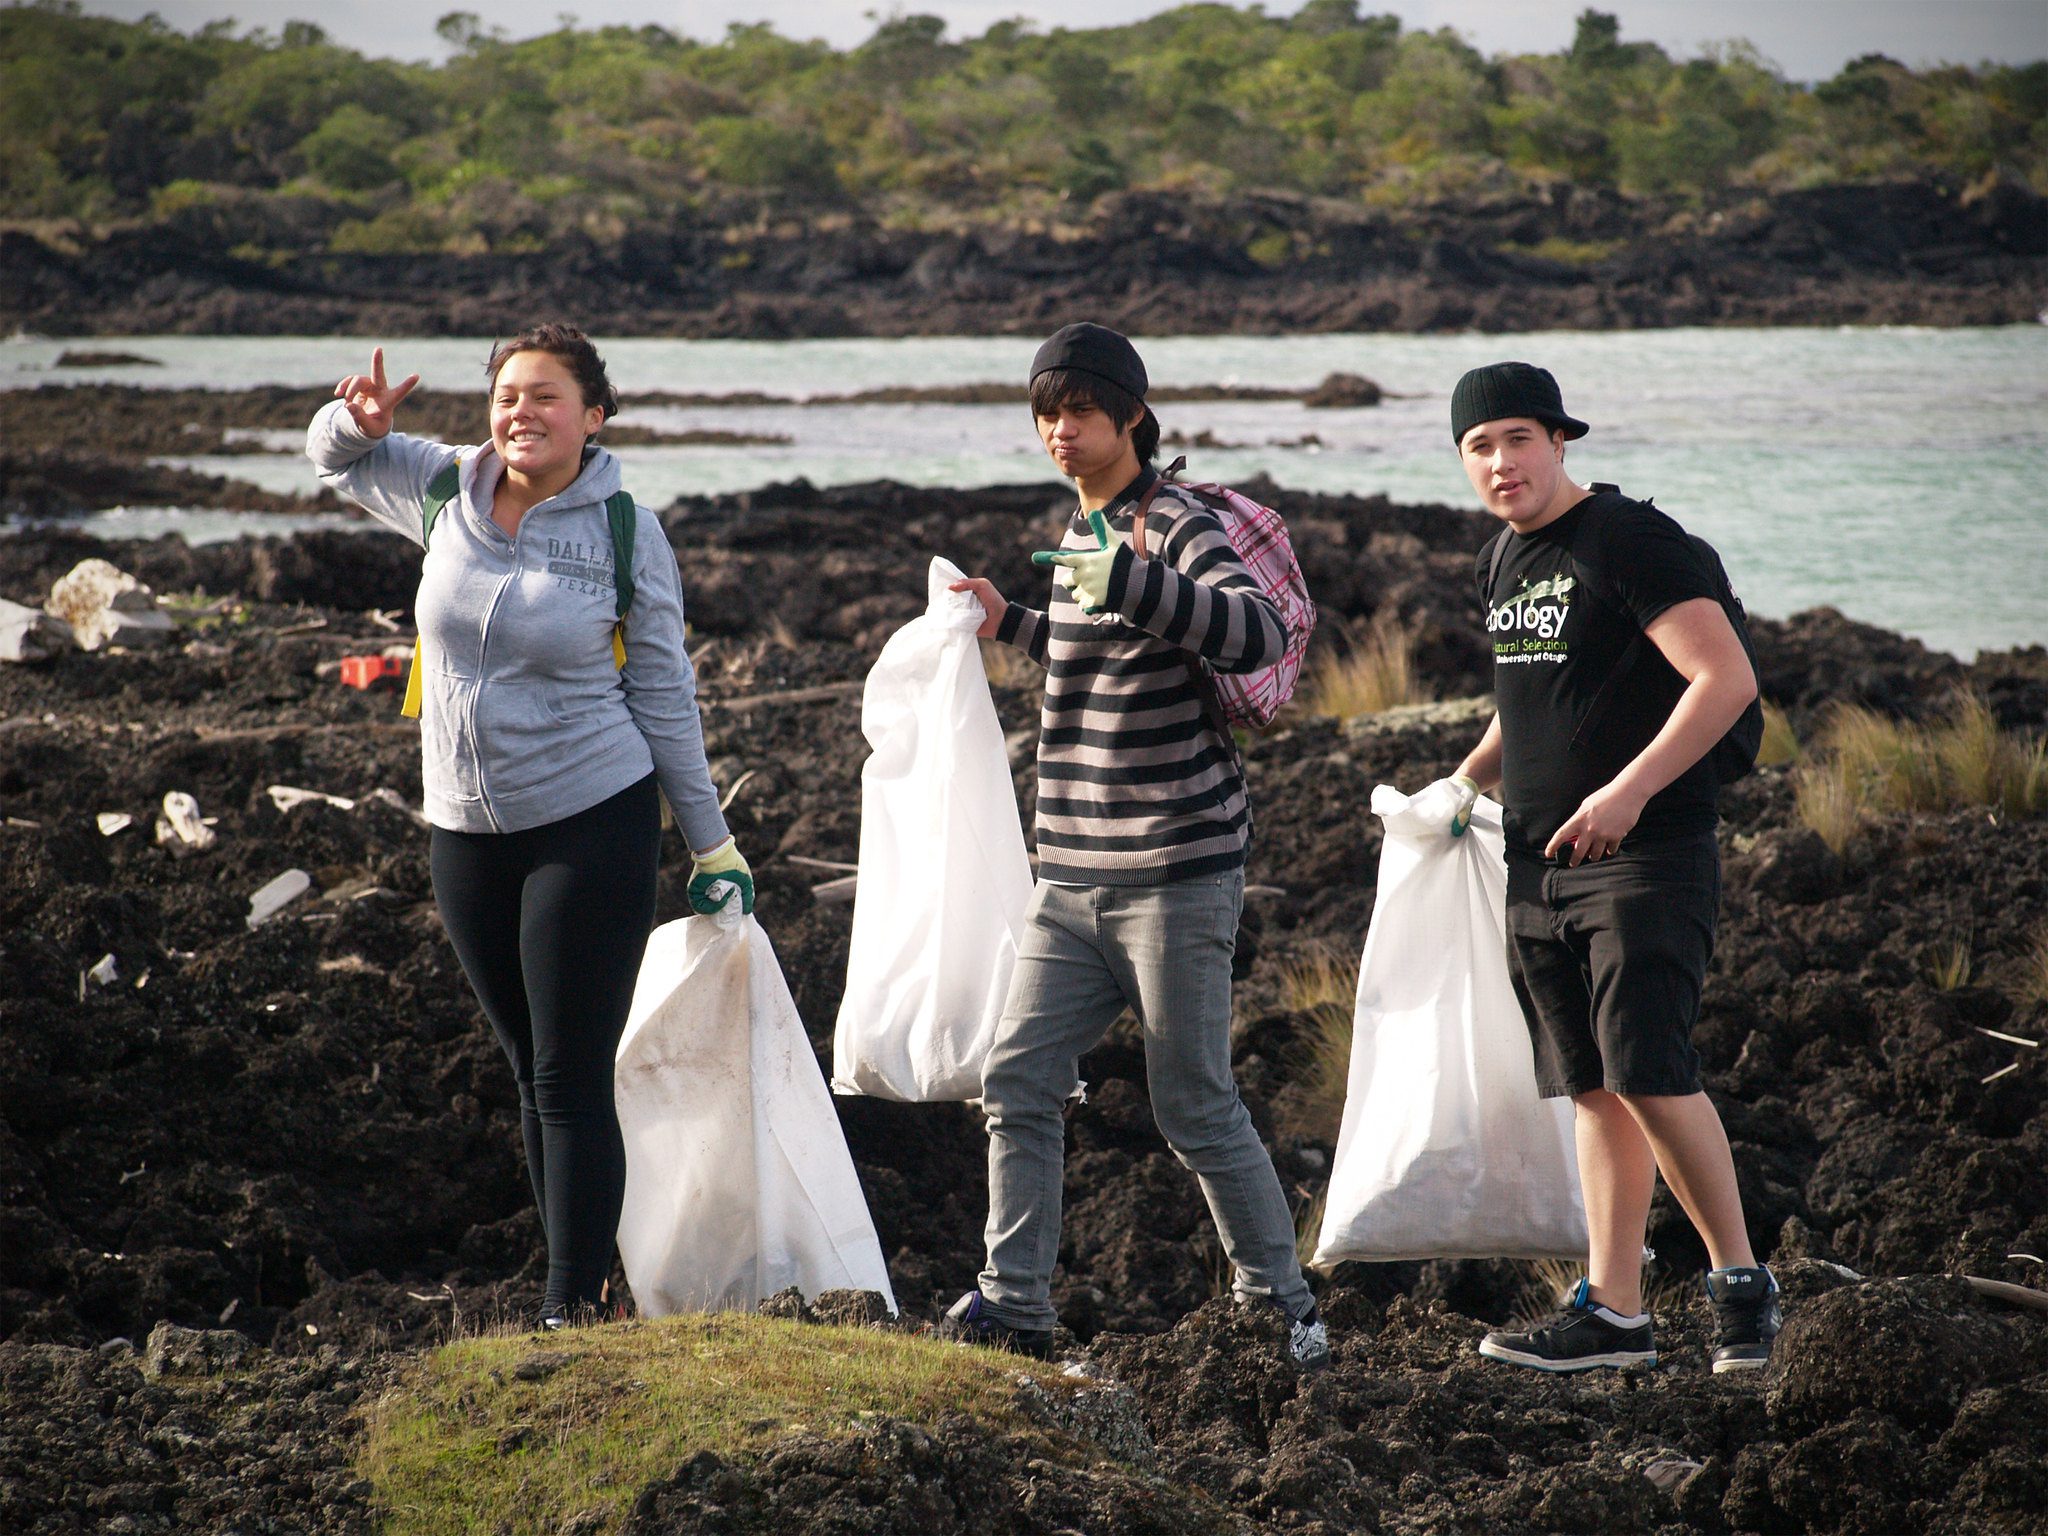 Students clean up trash.